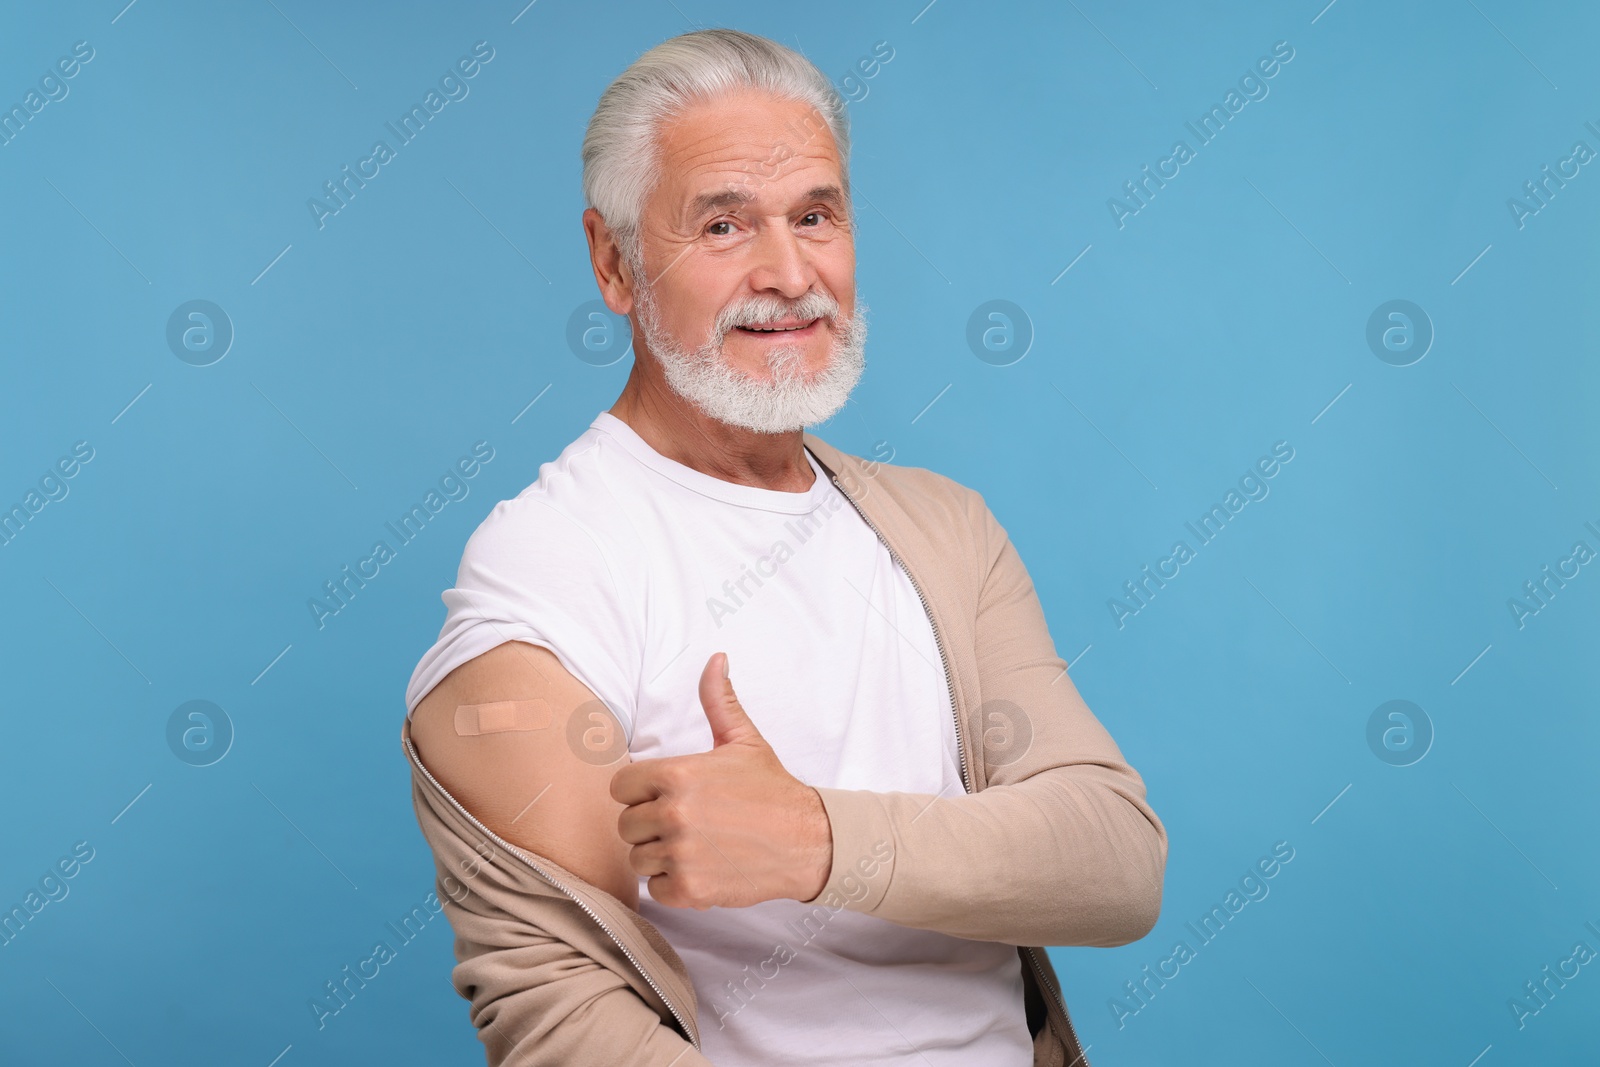 Photo of Senior man with adhesive bandage on his arm after vaccination showing thumb up against light blue background